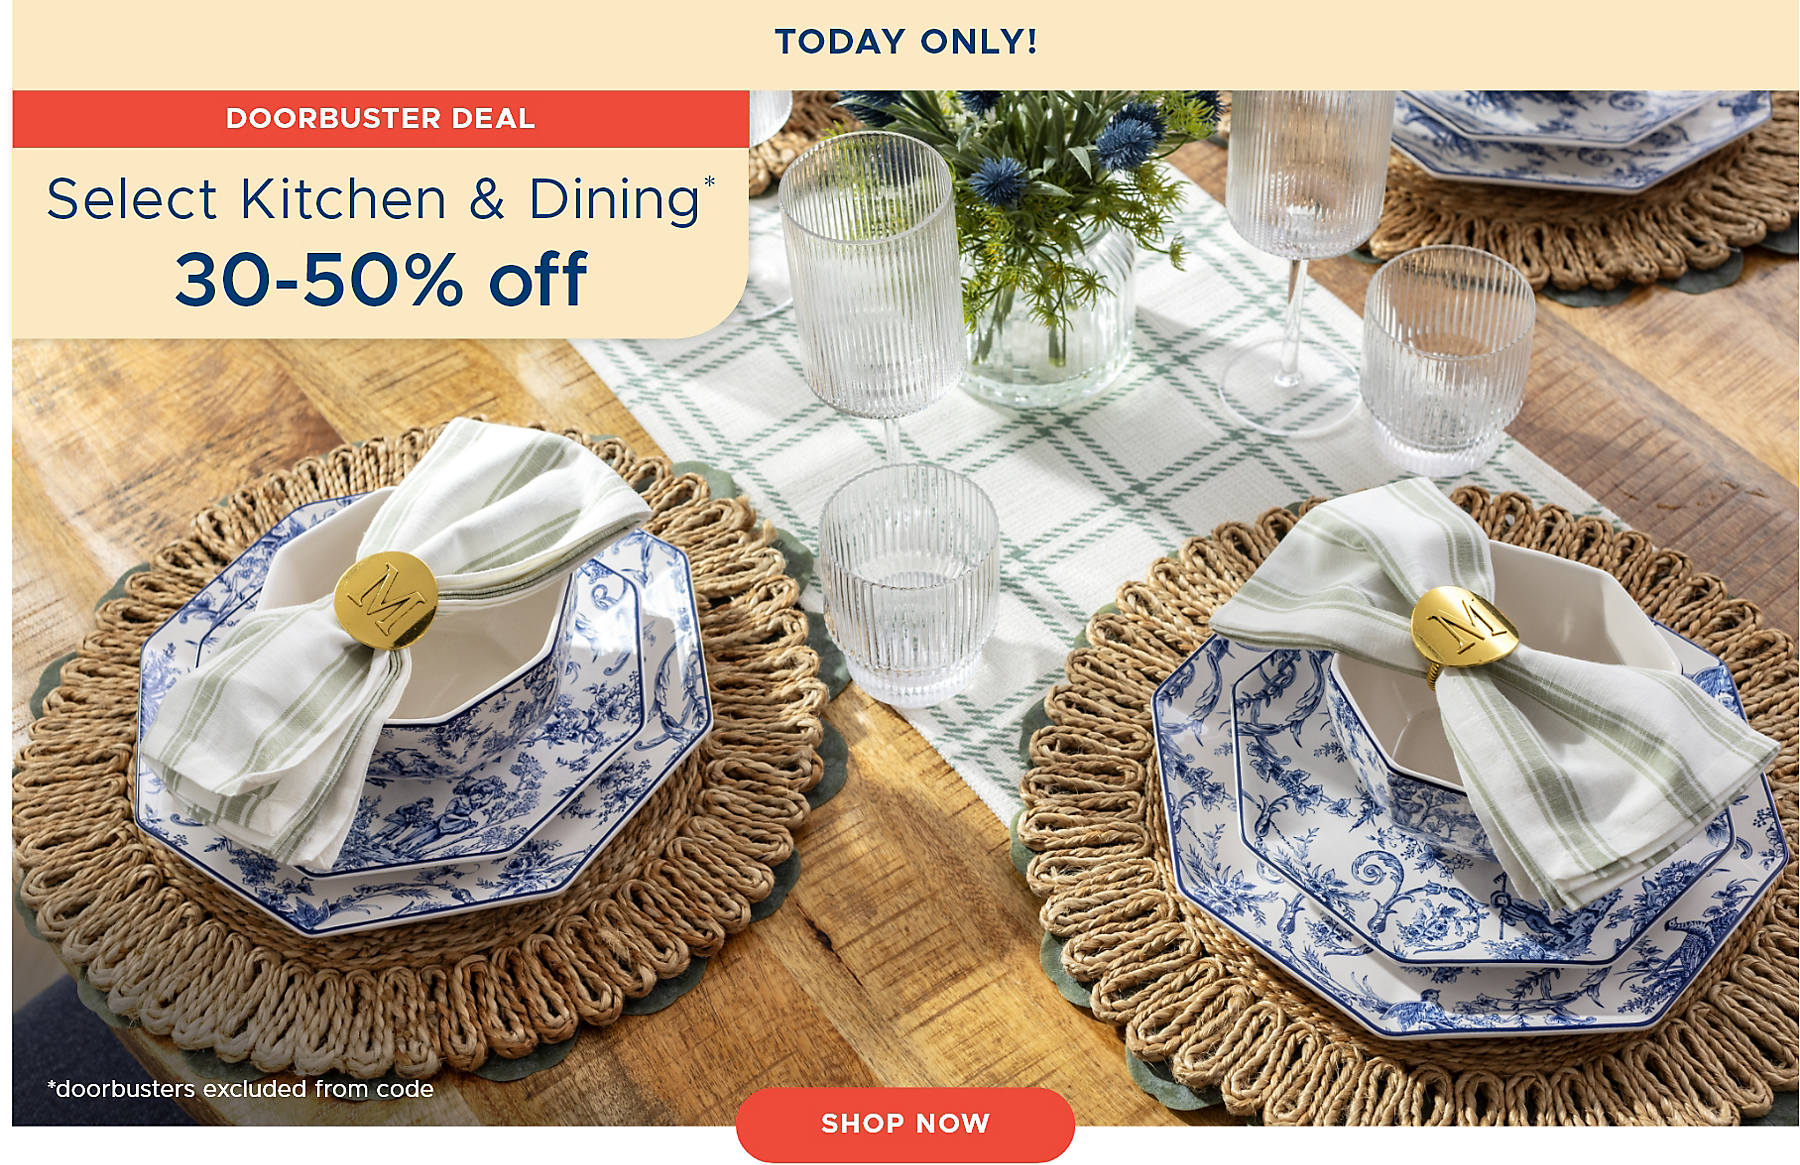 Today Only! Doorbuster Deal Select Kitchen & Dining* 30-50% off *doorbusters excluded from code shop now